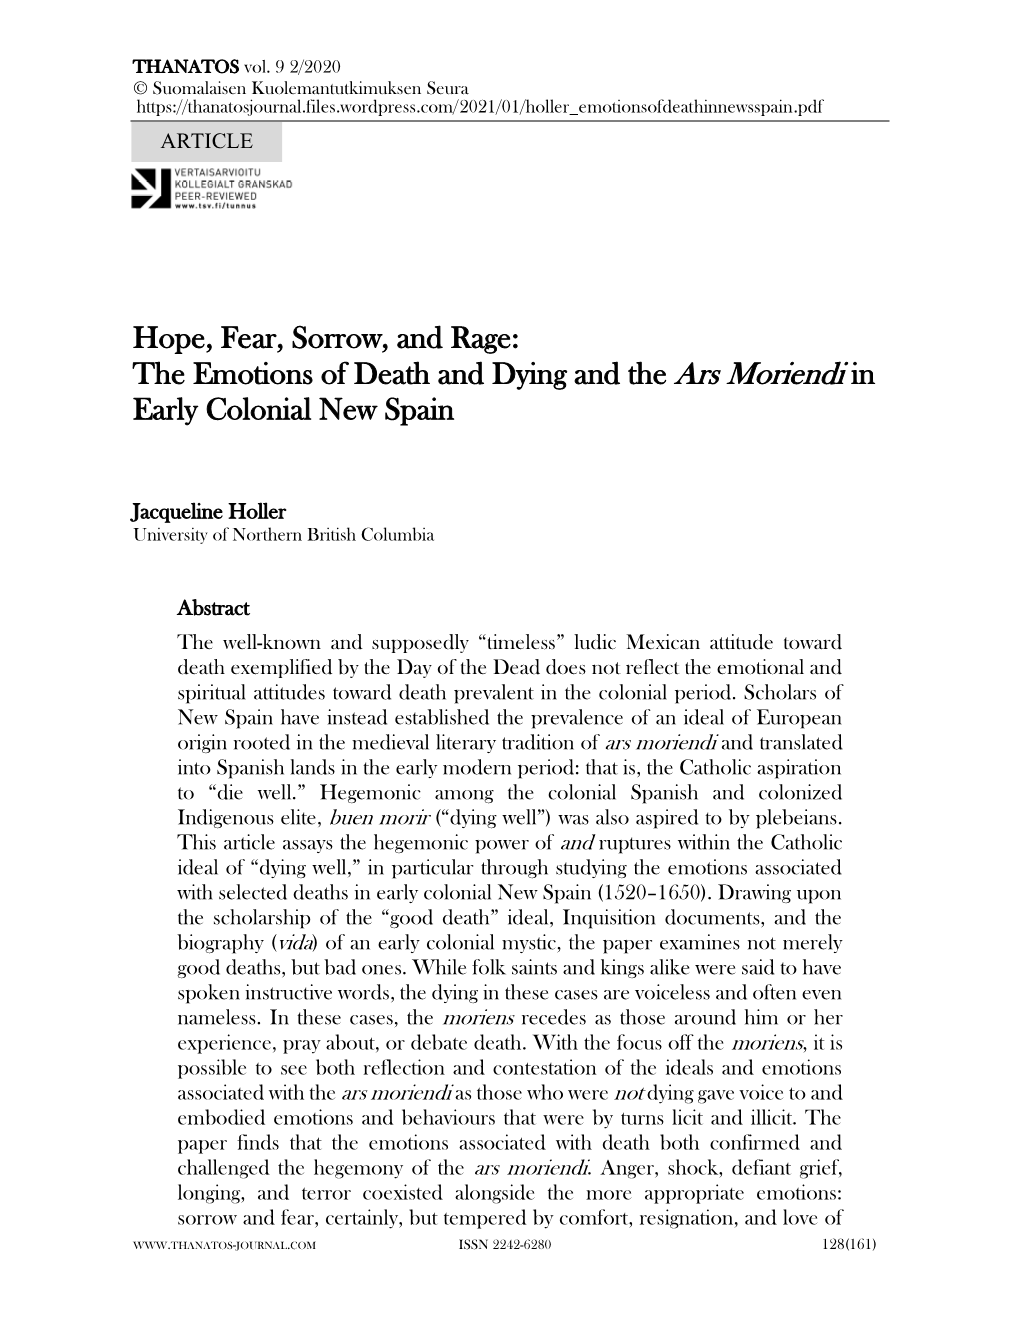 Hope, Fear, Sorrow, and Rage: the Emotions of Death and Dying and the Ars Moriendi in Early Colonial New Spain